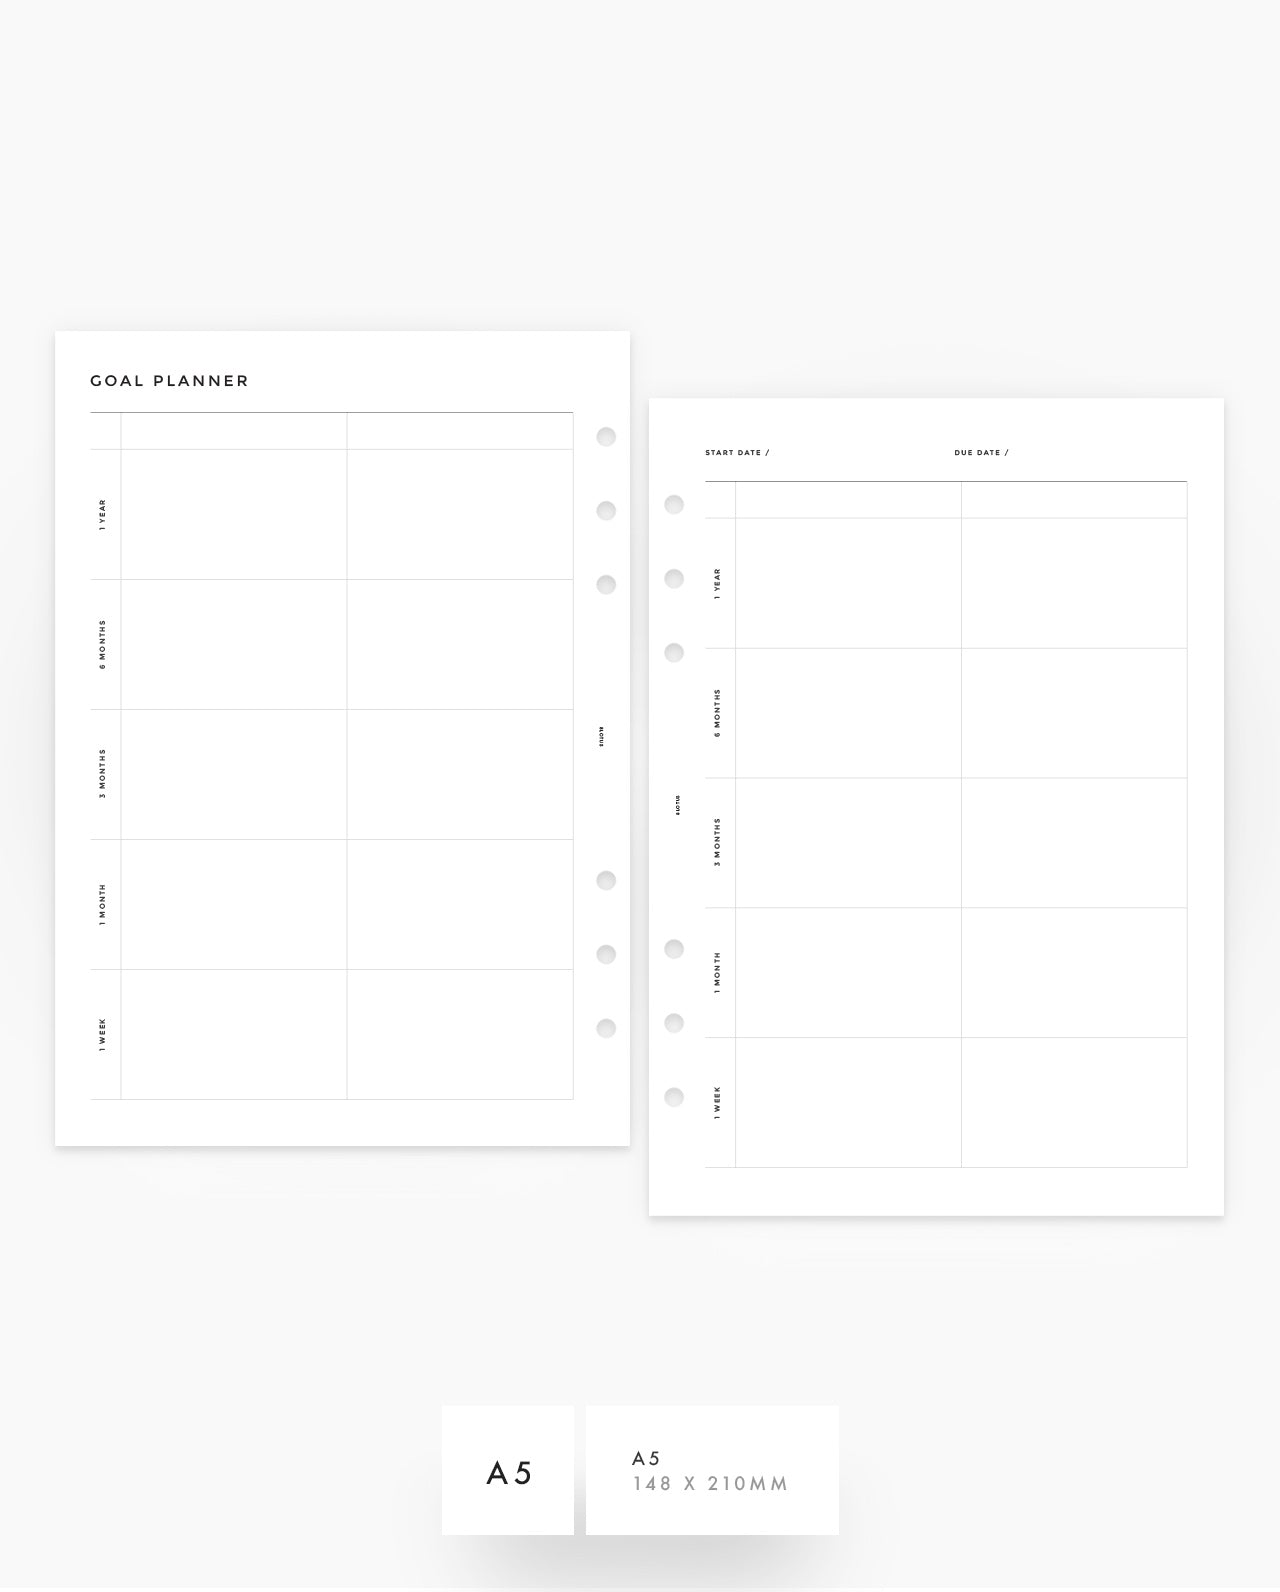 MN109 - Yearly Goals Planner - BLANK - PDF